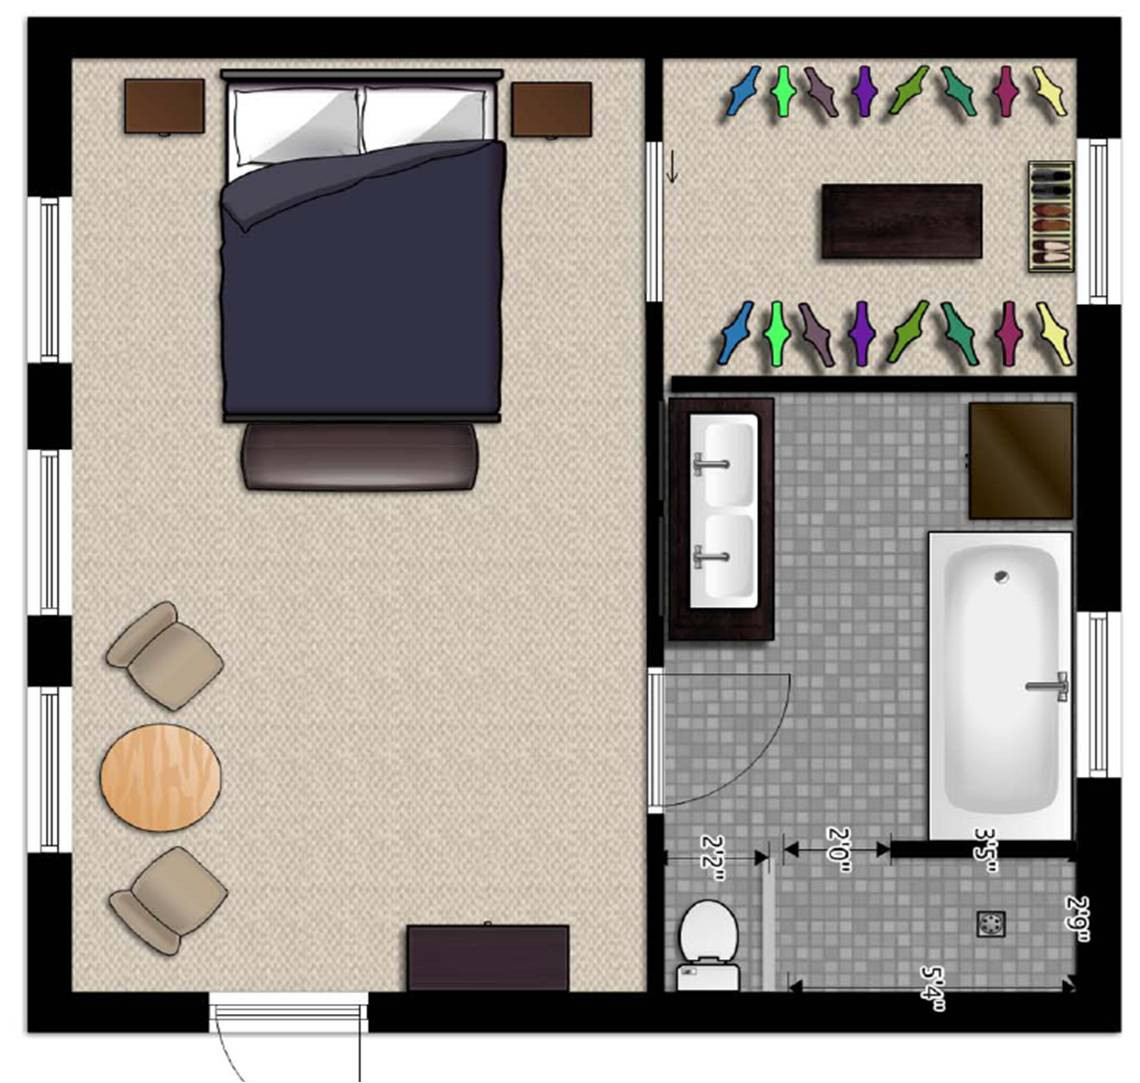 Master Bedroom Suite Floor Plans
 Tips on how to renovate build or a perfect home Part